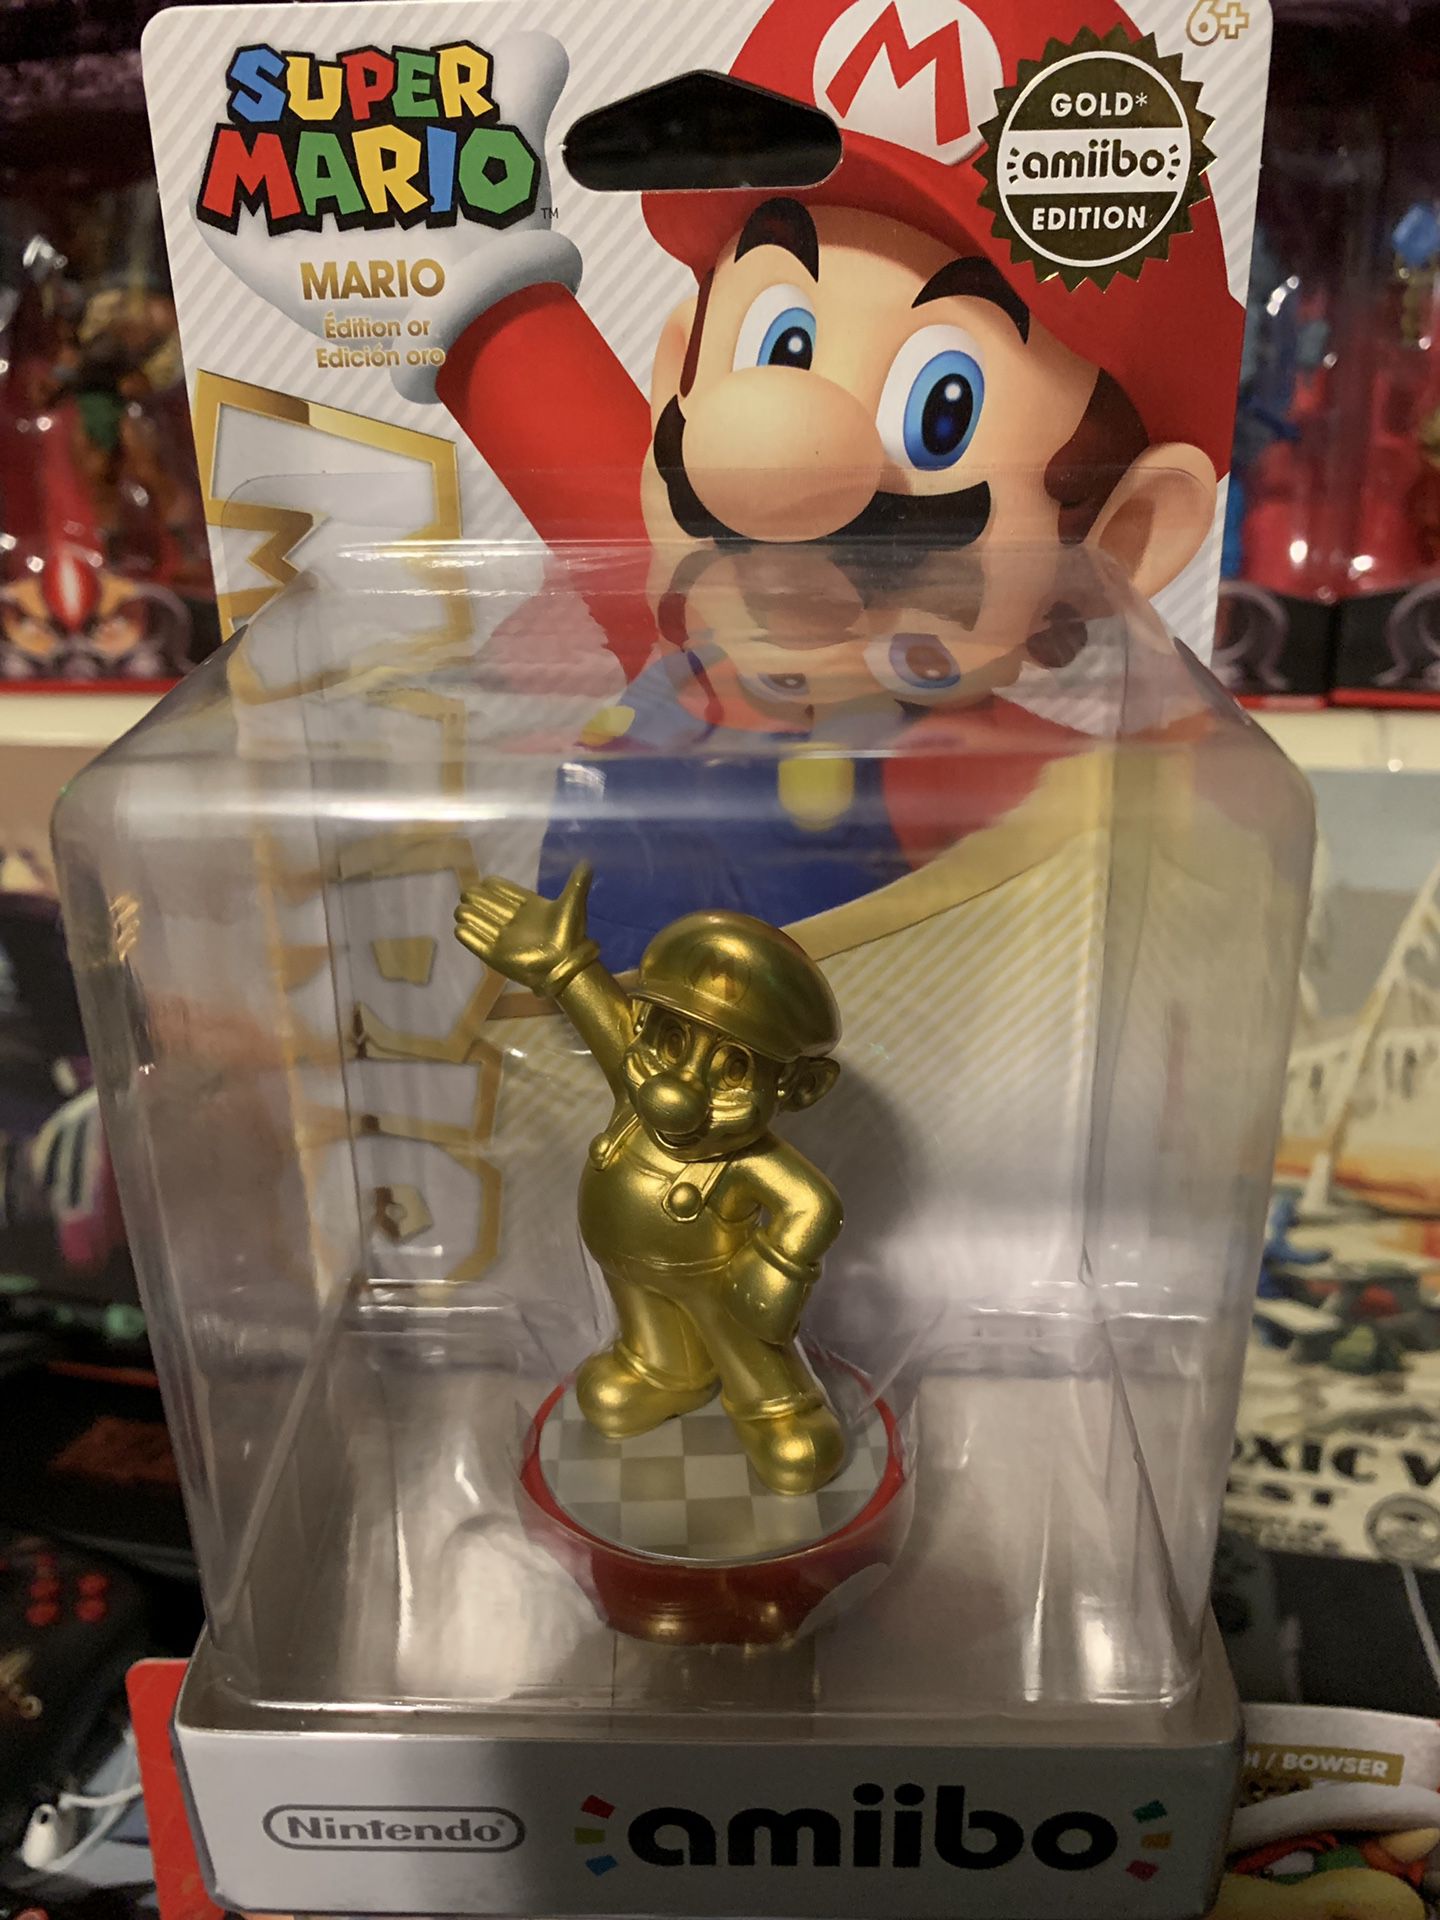 Wiisdom: Super Mario Odyssey Collector's Edition Strategy Guide and amiibo